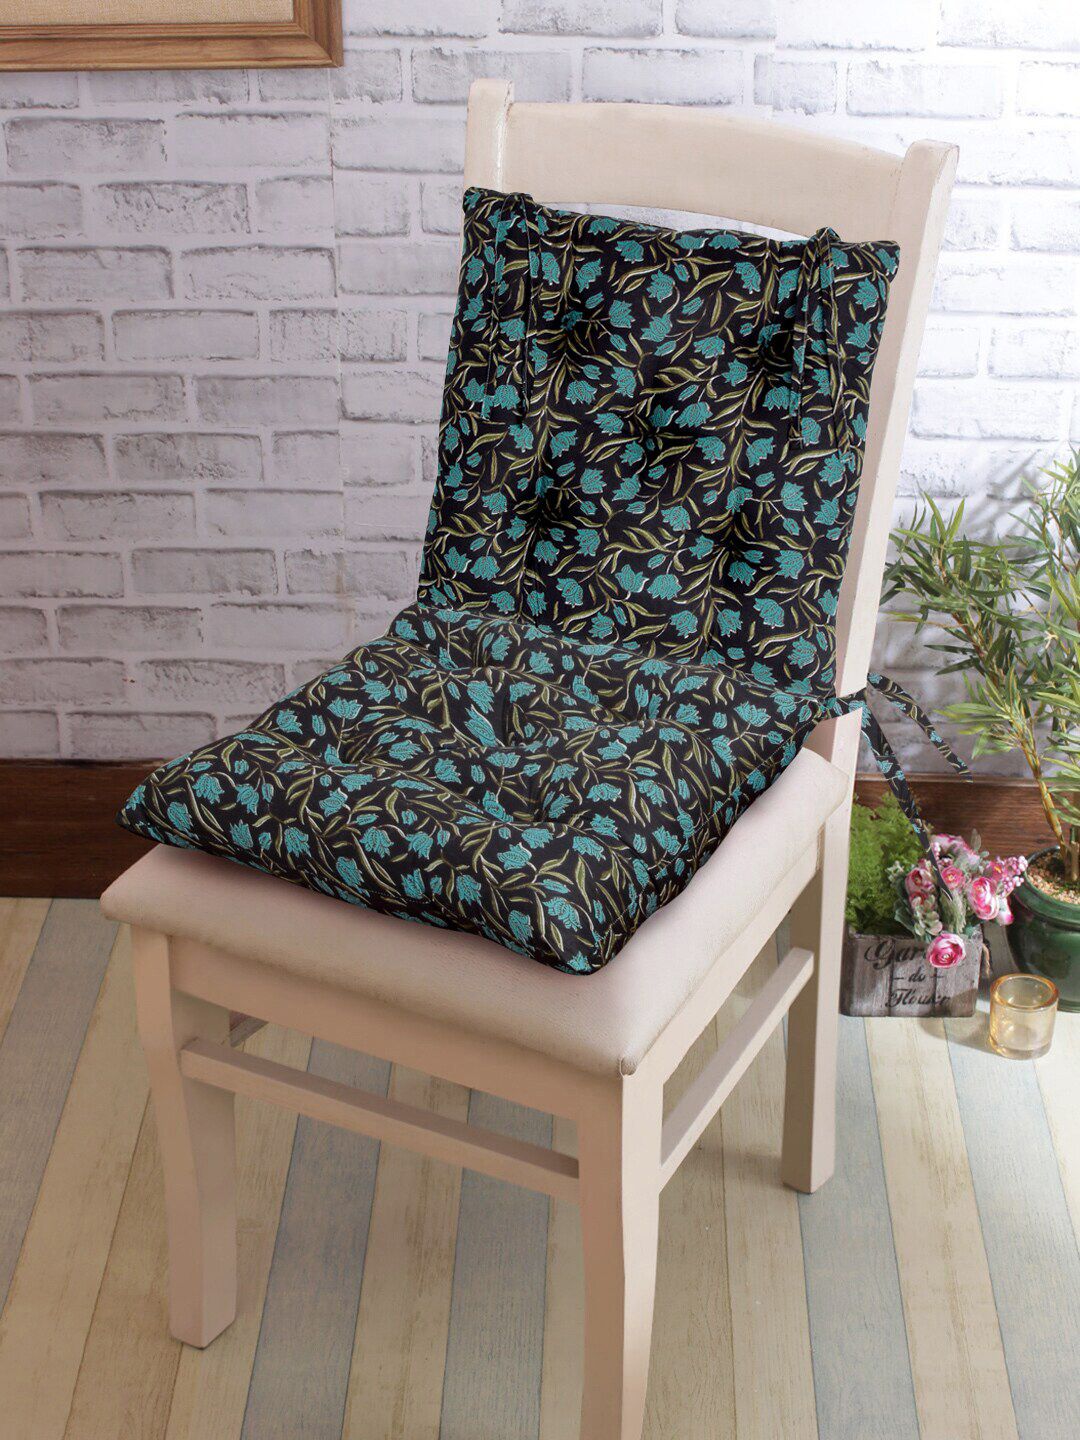 Rajasthan Decor Set Of 2 Black & Turquoise Blue Floral Printed Cotton Chair Pads Price in India